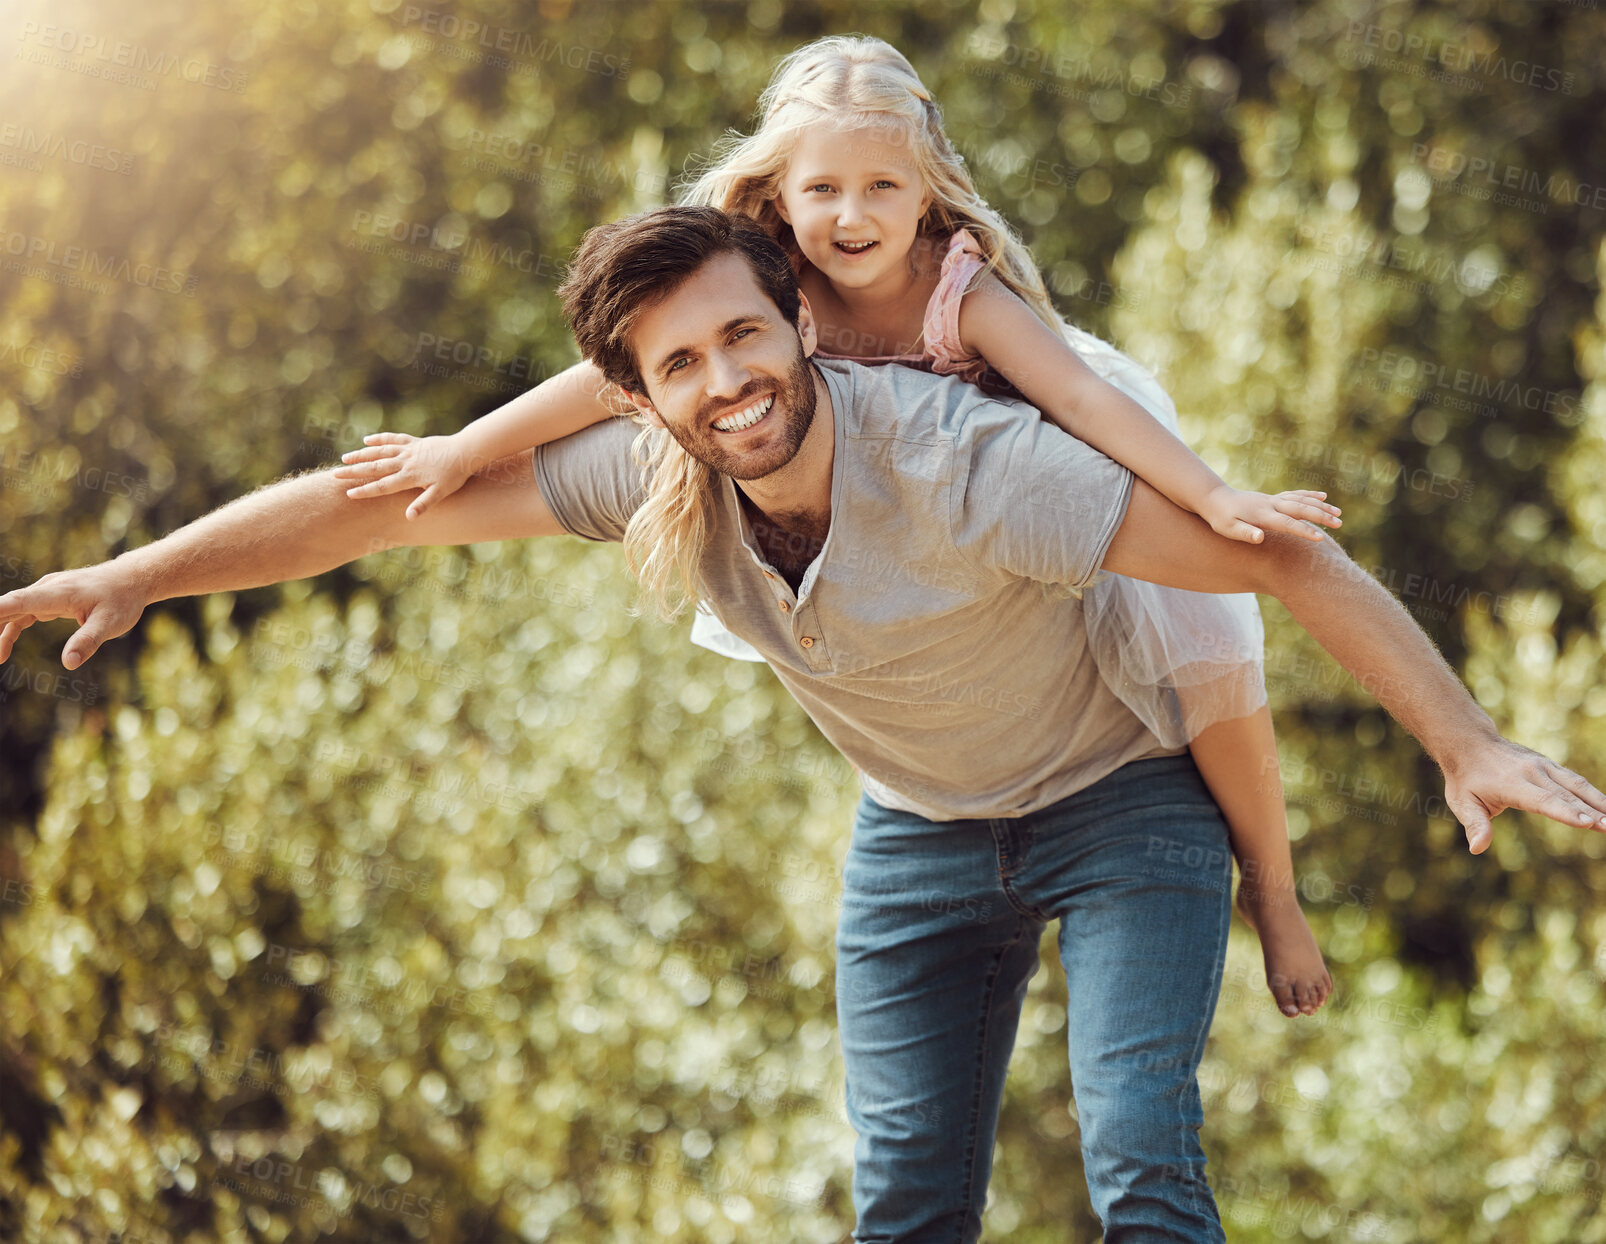 Buy stock photo Family, portrait or piggy back in airplane game, nature park or home garden and house backyard, trust or support. Smile, happy or father carrying child in flying fun, energy or summer bonding freedom